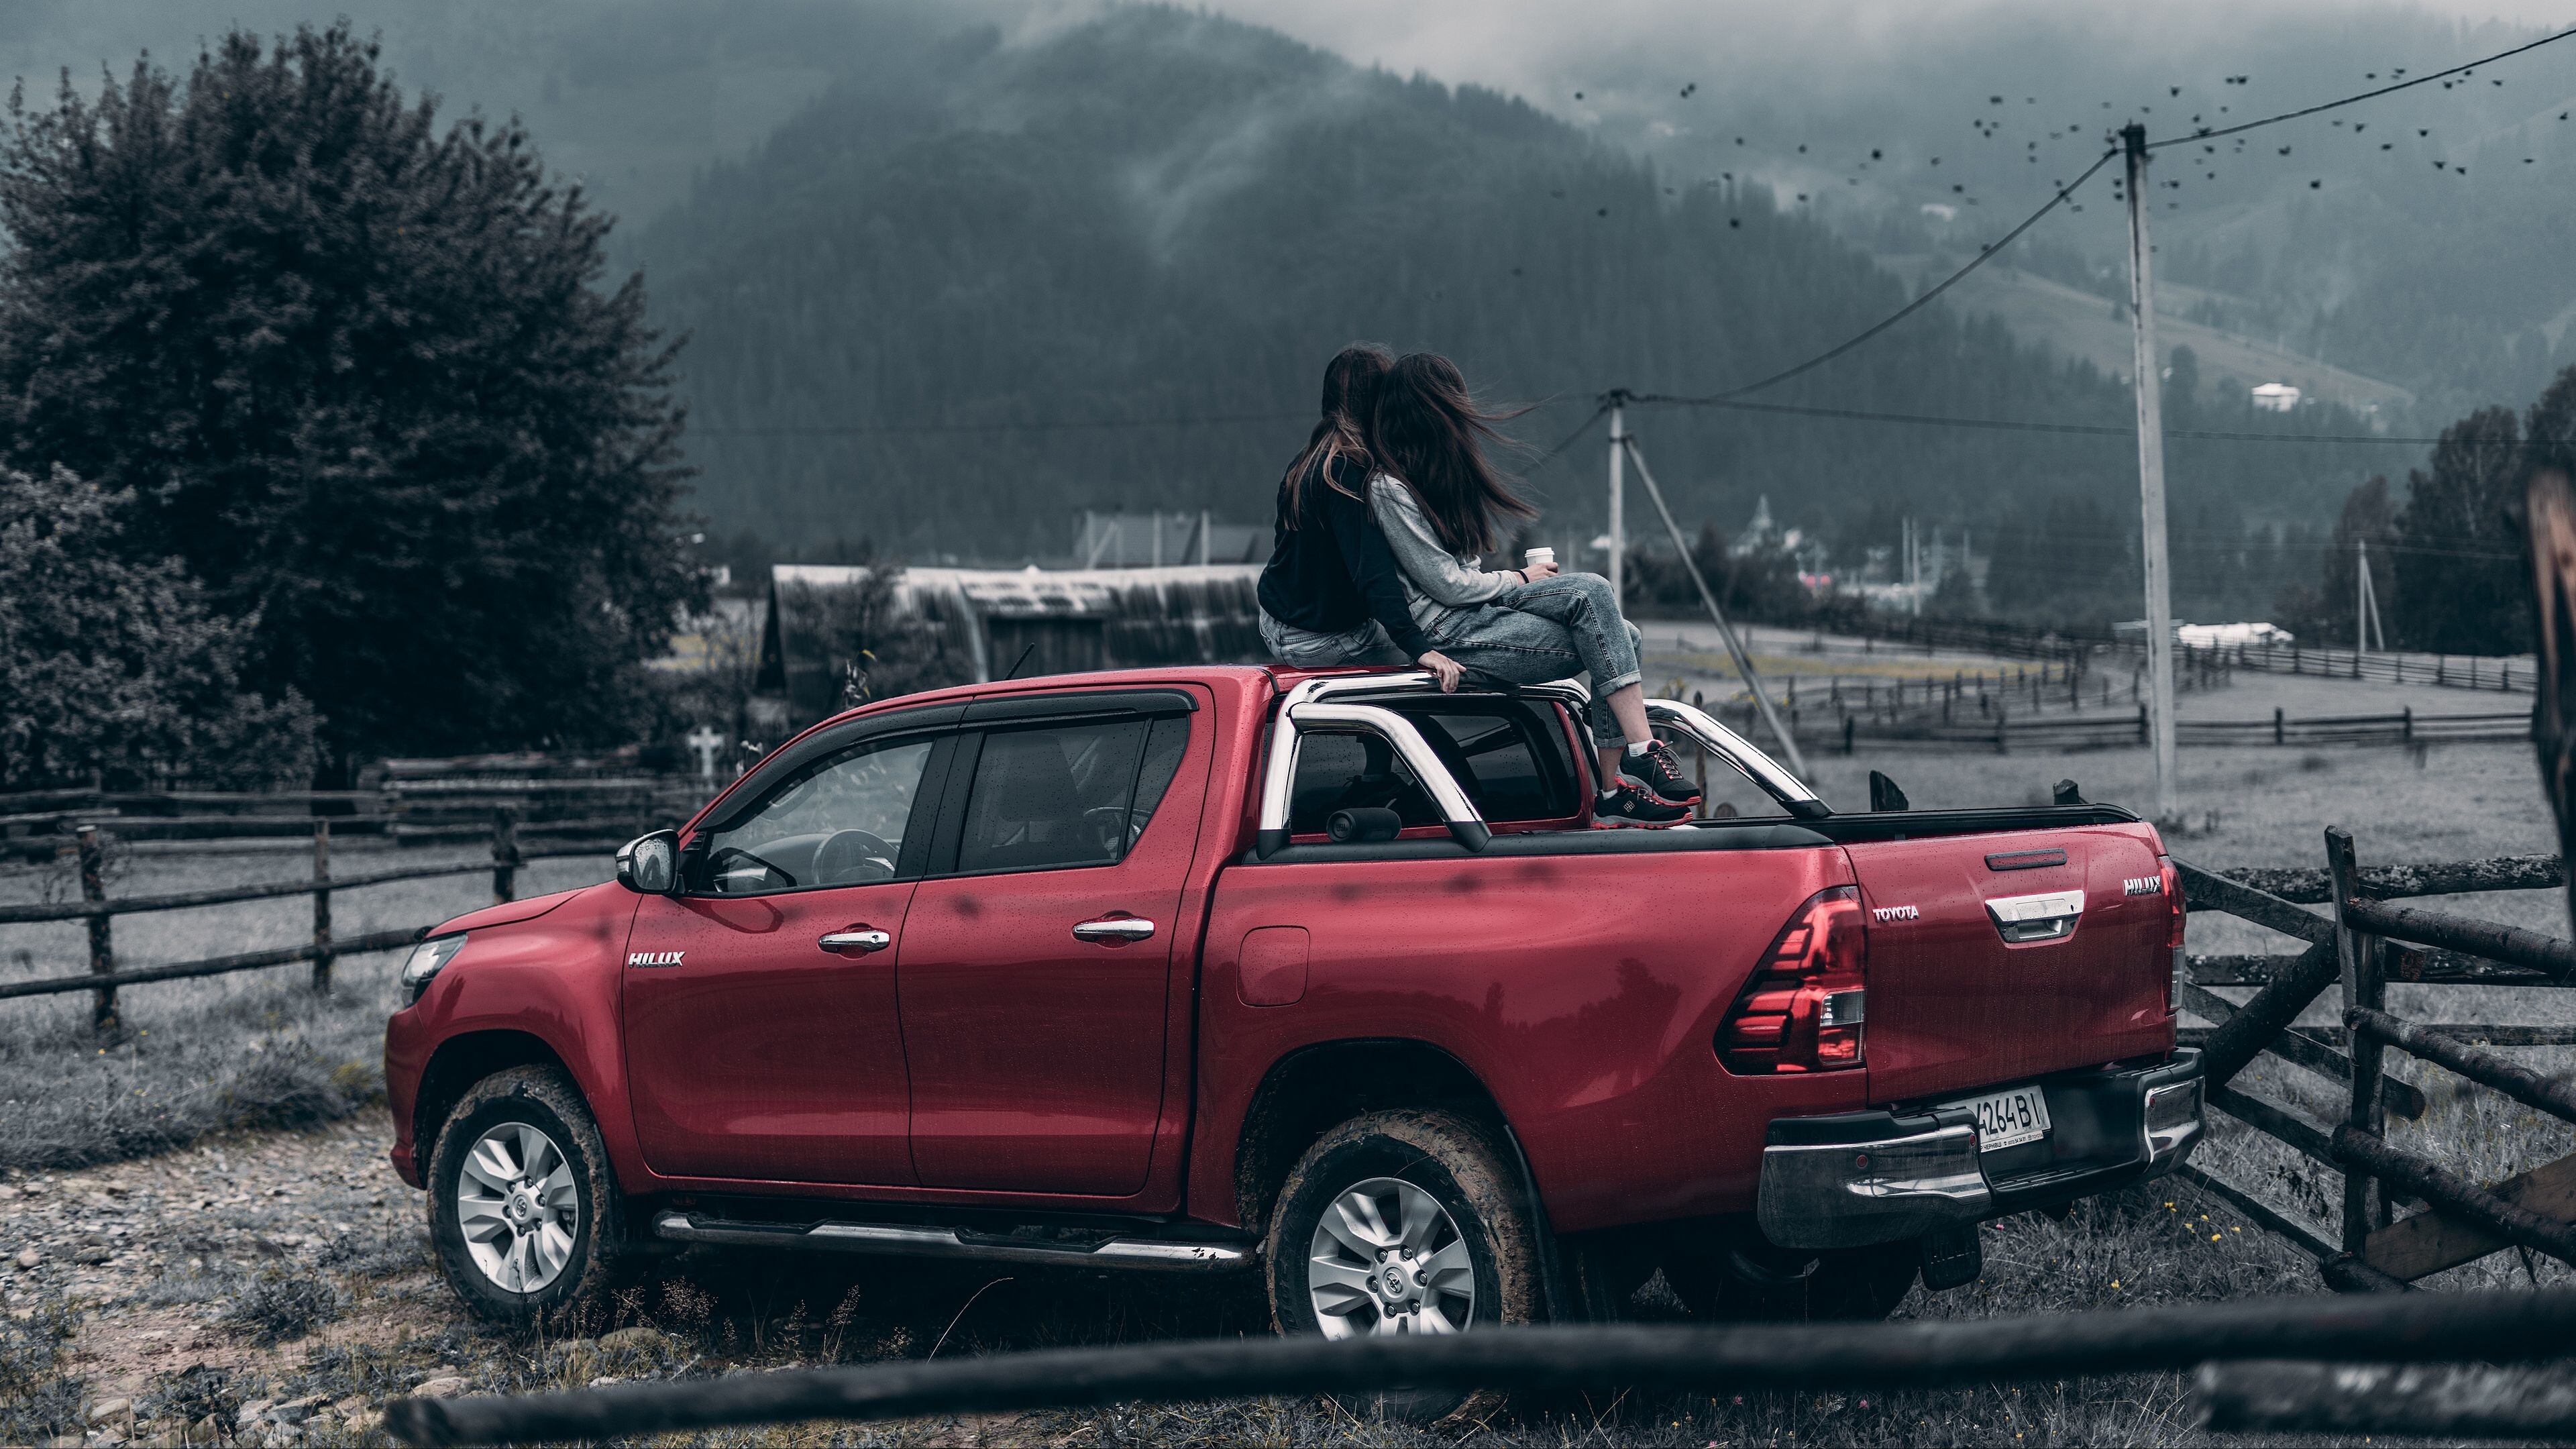 Girls and Trucks: Toyota Hilux, A new pickup model produced by the Japanese automobile manufacturer Toyota. 3840x2160 4K Wallpaper.